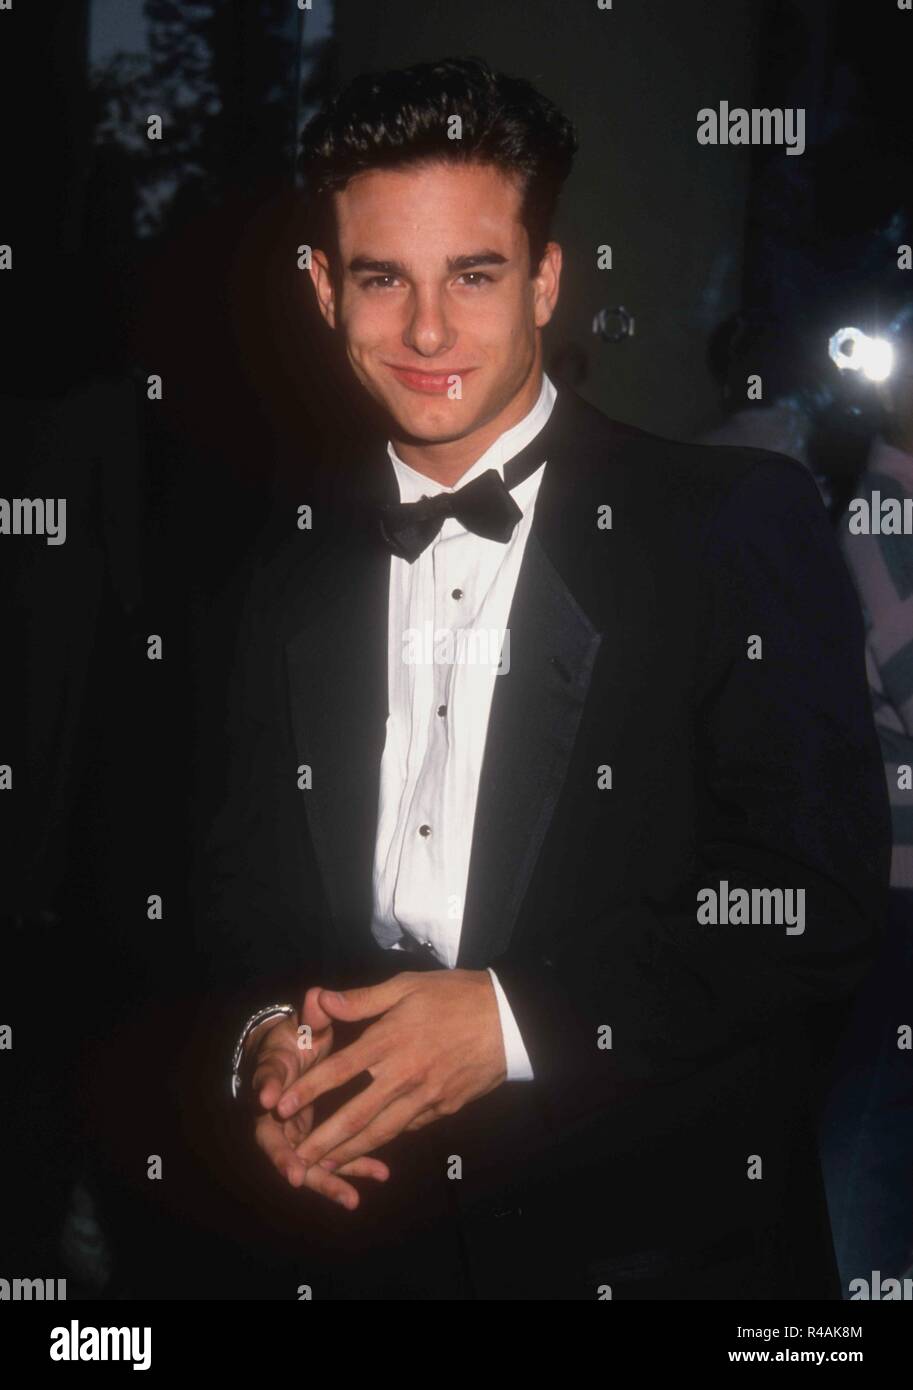 BEVERLY HILLS, CA - FEBRUARY 26: Actor Michael Cade attends the Ninth Annual Soap Opera Digest Awards on February 26, 1993 at the Beverly Hilton Hotel in Beverly Hills, California. Photo by Barry King/Alamy Stock Photo Stock Photo